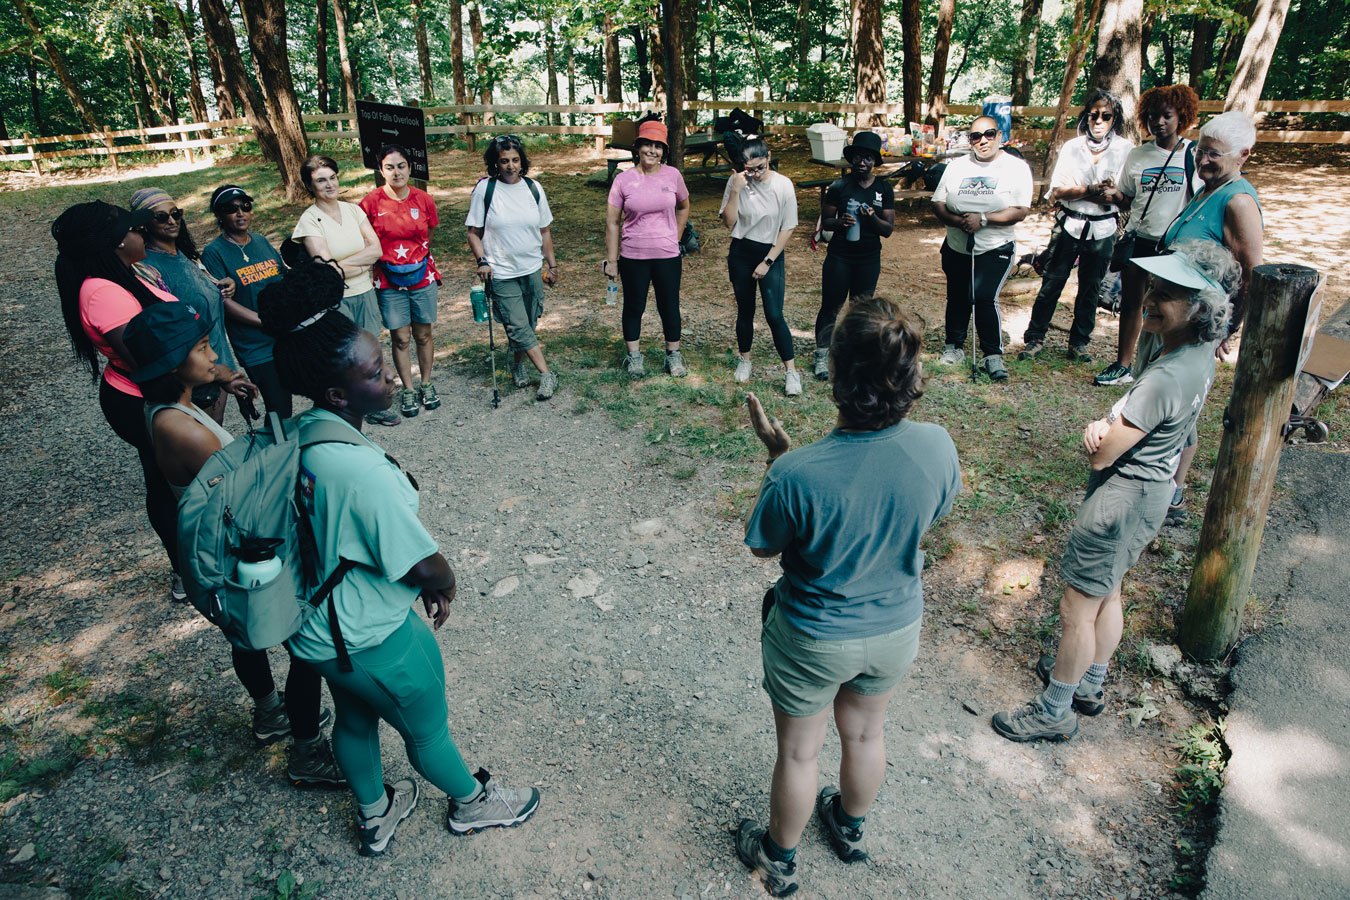 Olivia Mckellar of RWN talks to the group in an orientation before starting the hike. Photo by Bonnie Bandurski